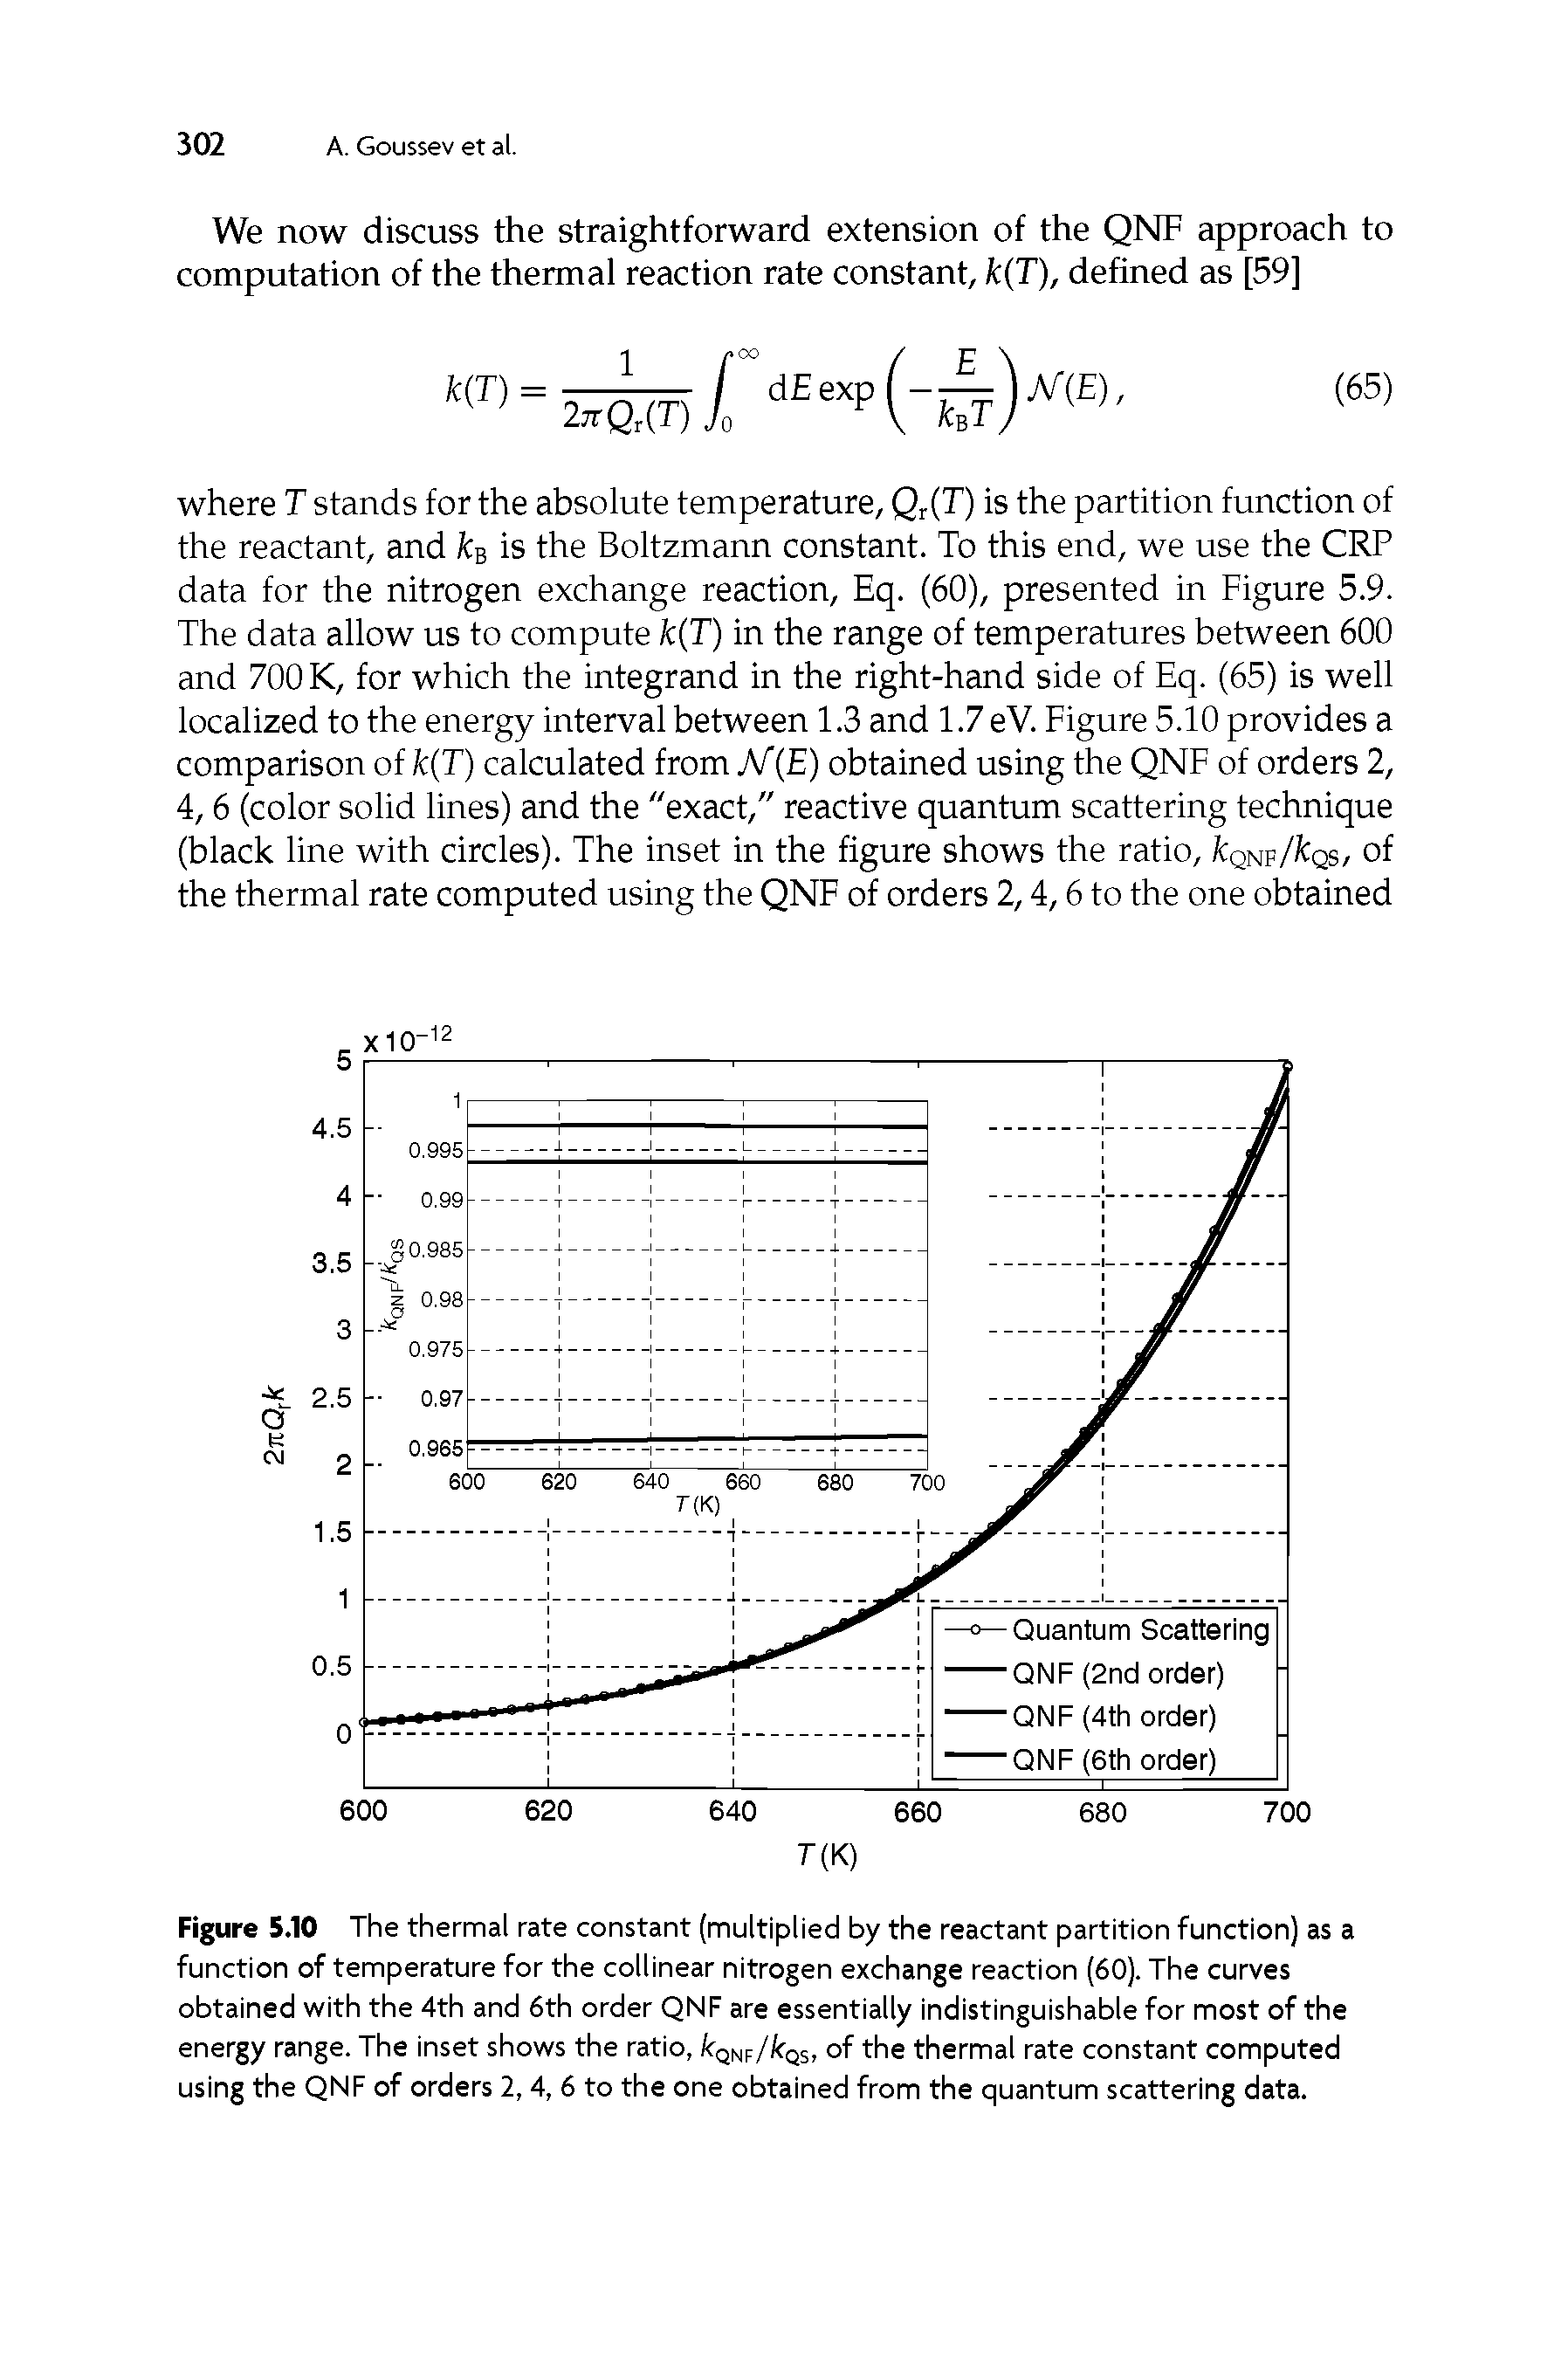 Figure 5.10 The thermal rate constant (multiplied by the reactant partition function) as a function of temperature for the collinear nitrogen exchange reaction (60). The curves obtained with the 4th and 6th order QNF are essentially indistinguishable for most of the energy range. The inset shows the ratio, kQNp/kQs, of the thermal rate constant computed using the QNF of orders 2, 4, 6 to the one obtained from the quantum scattering data.